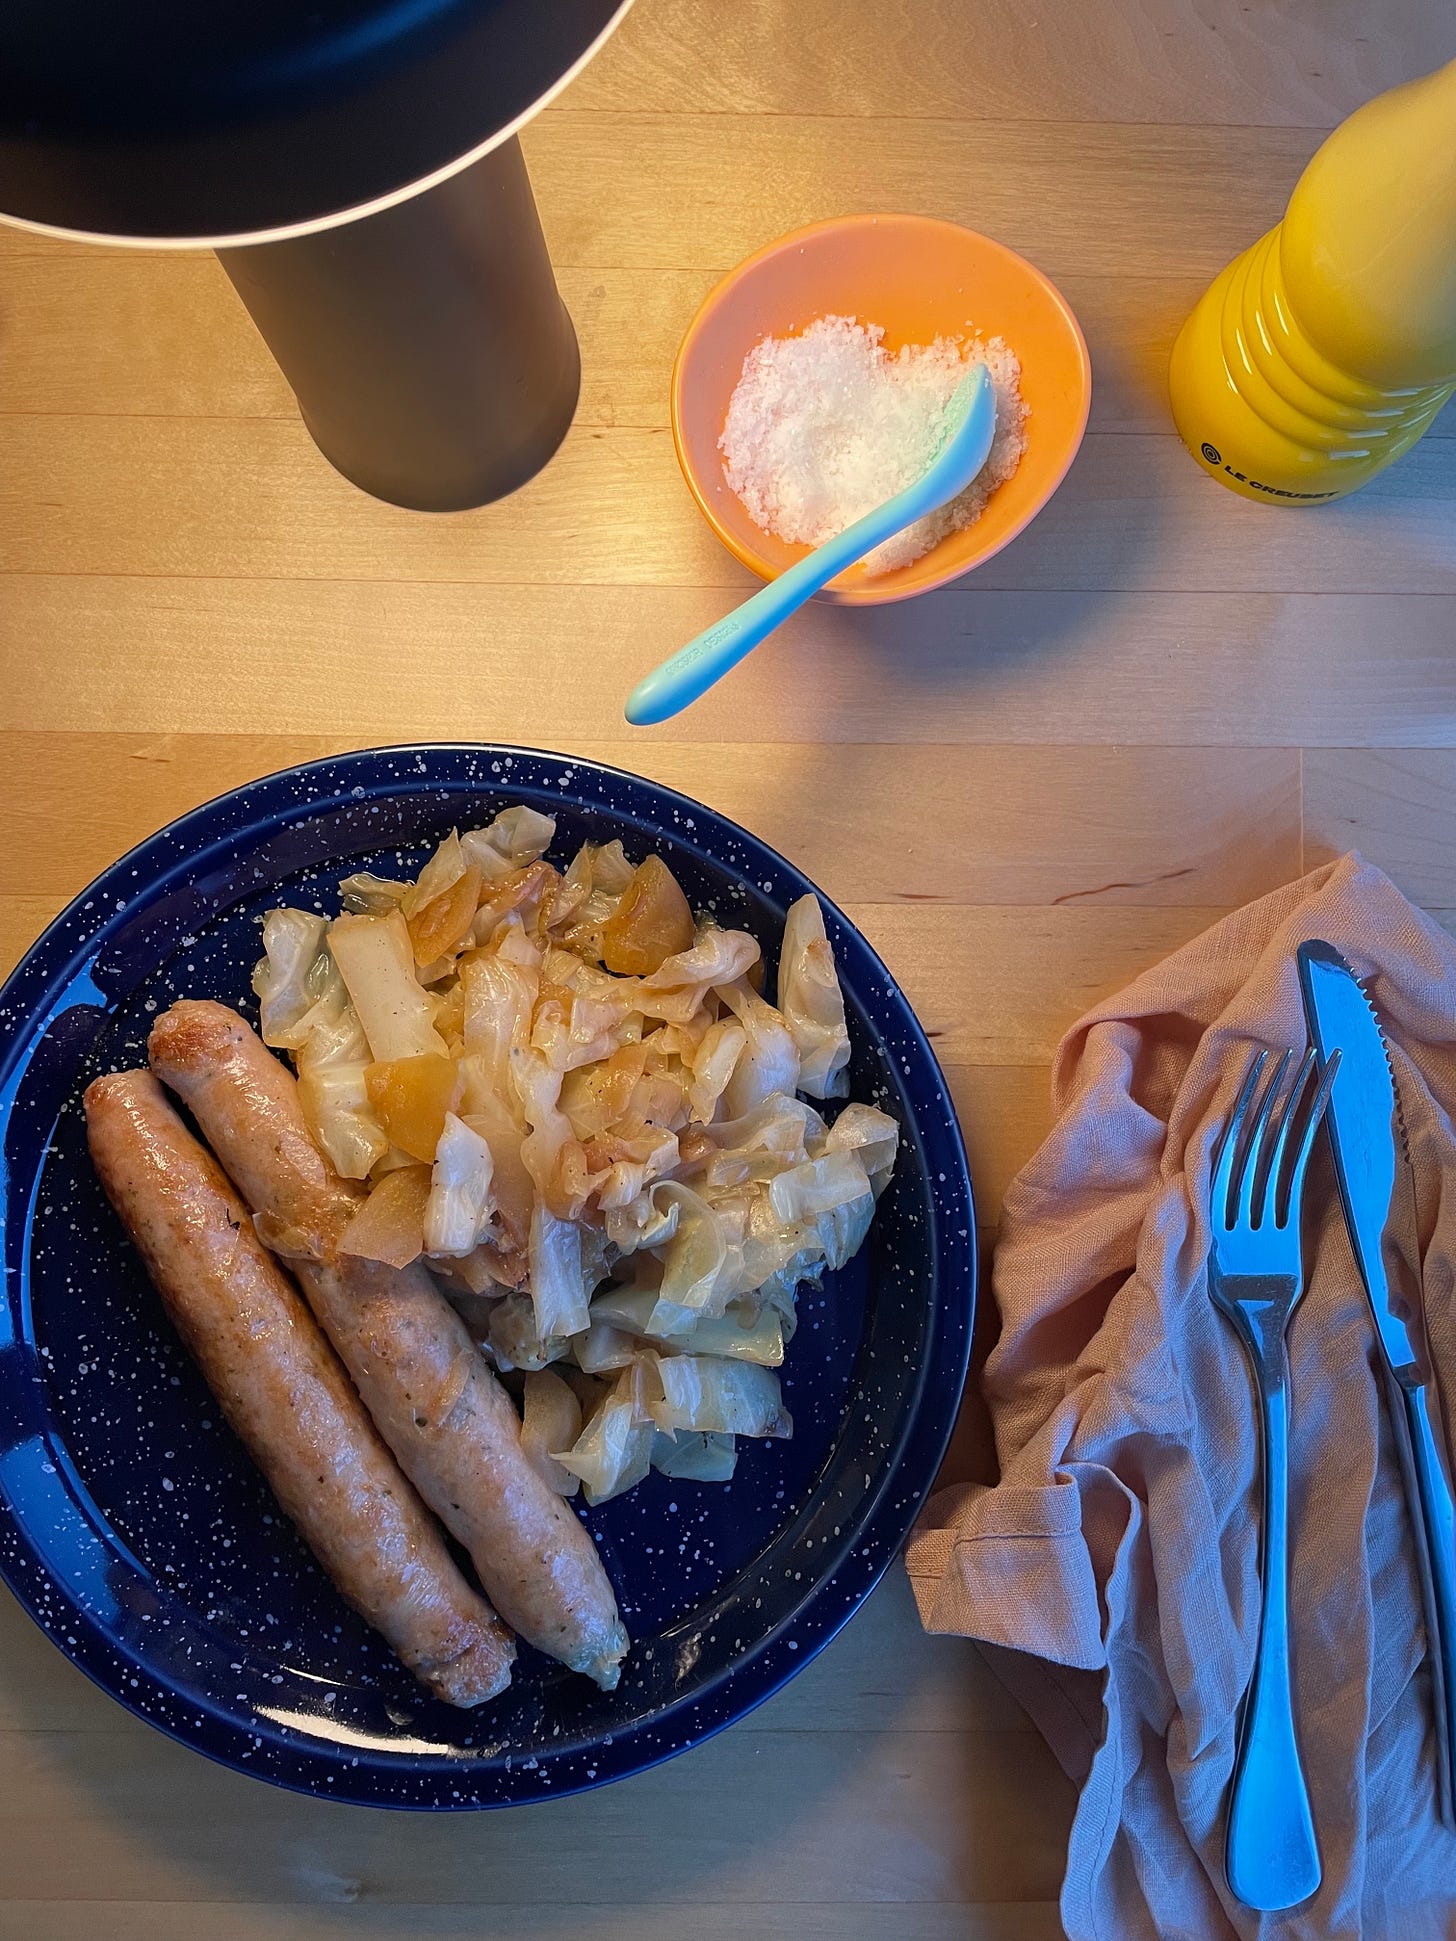 Chicken sausages on a speckled plate alongside braised cabbage, apple and onion. Sea salt and a pepper grinder nearby.